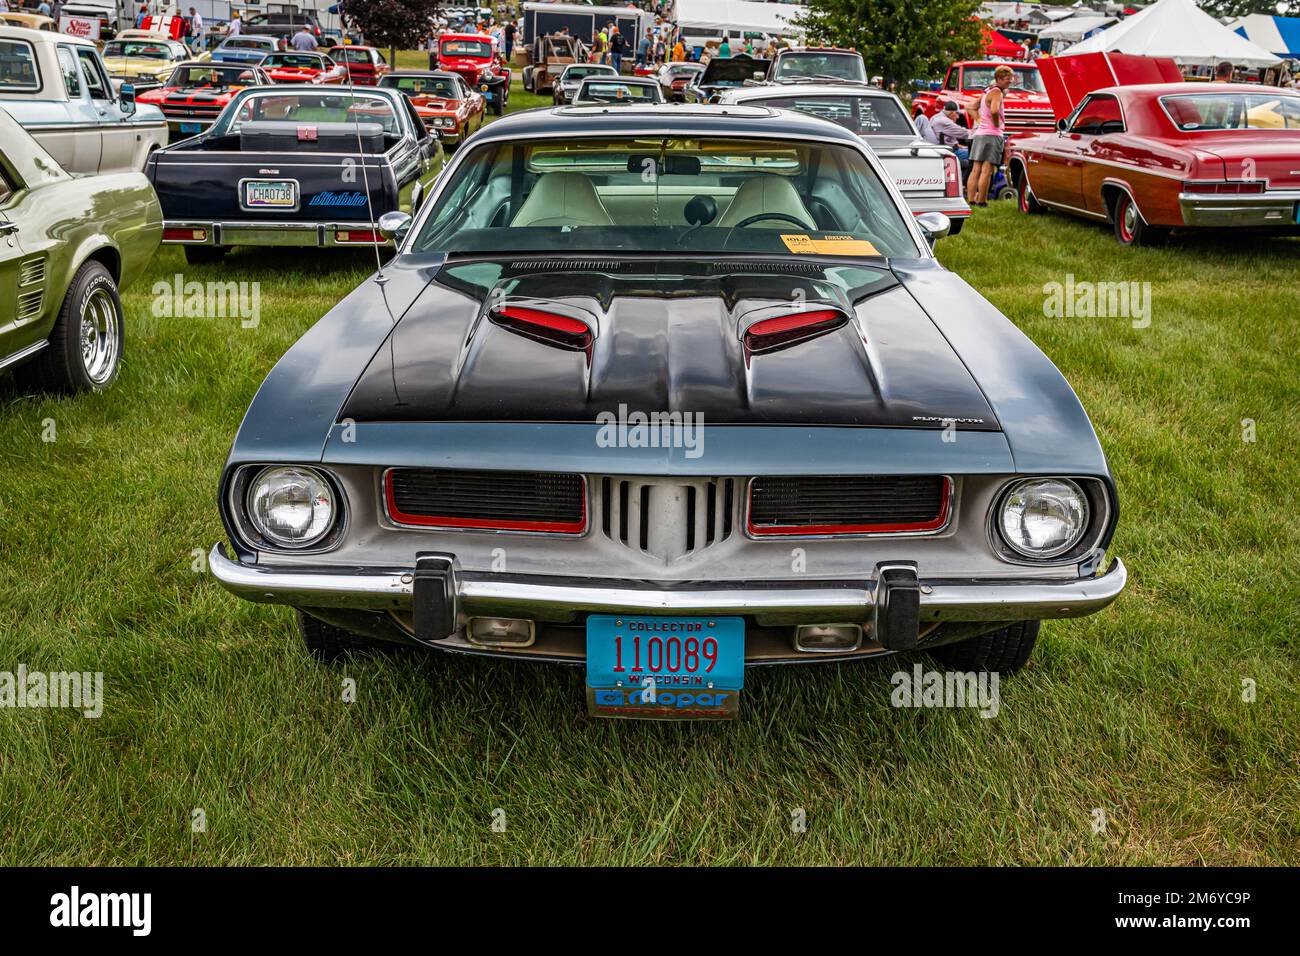 Iola, WI - July 07, 2022: High perspective front view of a 1973 Plymouth Barracuda 2 Door Hardtop at a local car show. Stock Photo